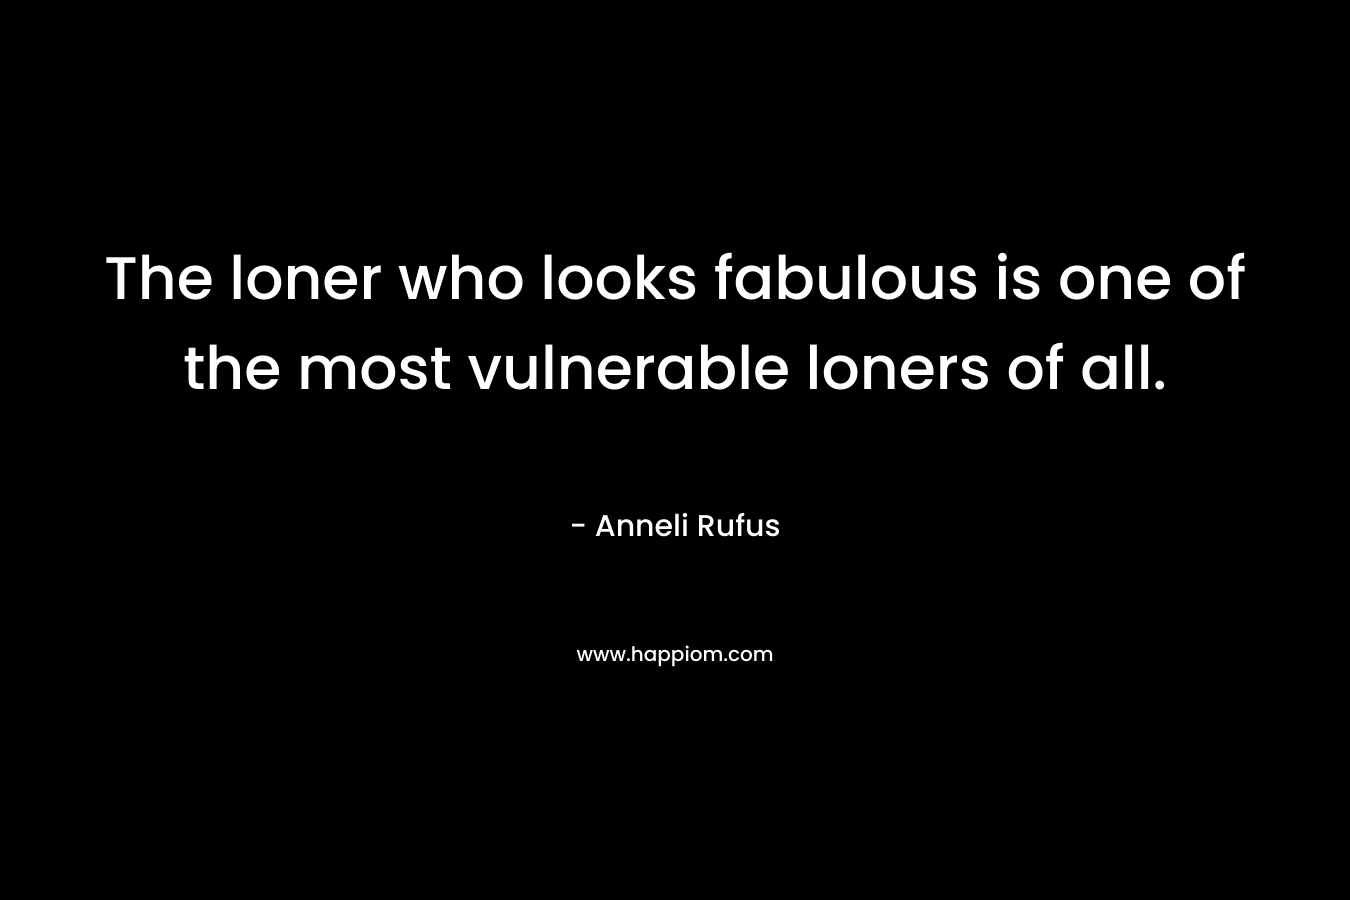 The loner who looks fabulous is one of the most vulnerable loners of all. – Anneli Rufus